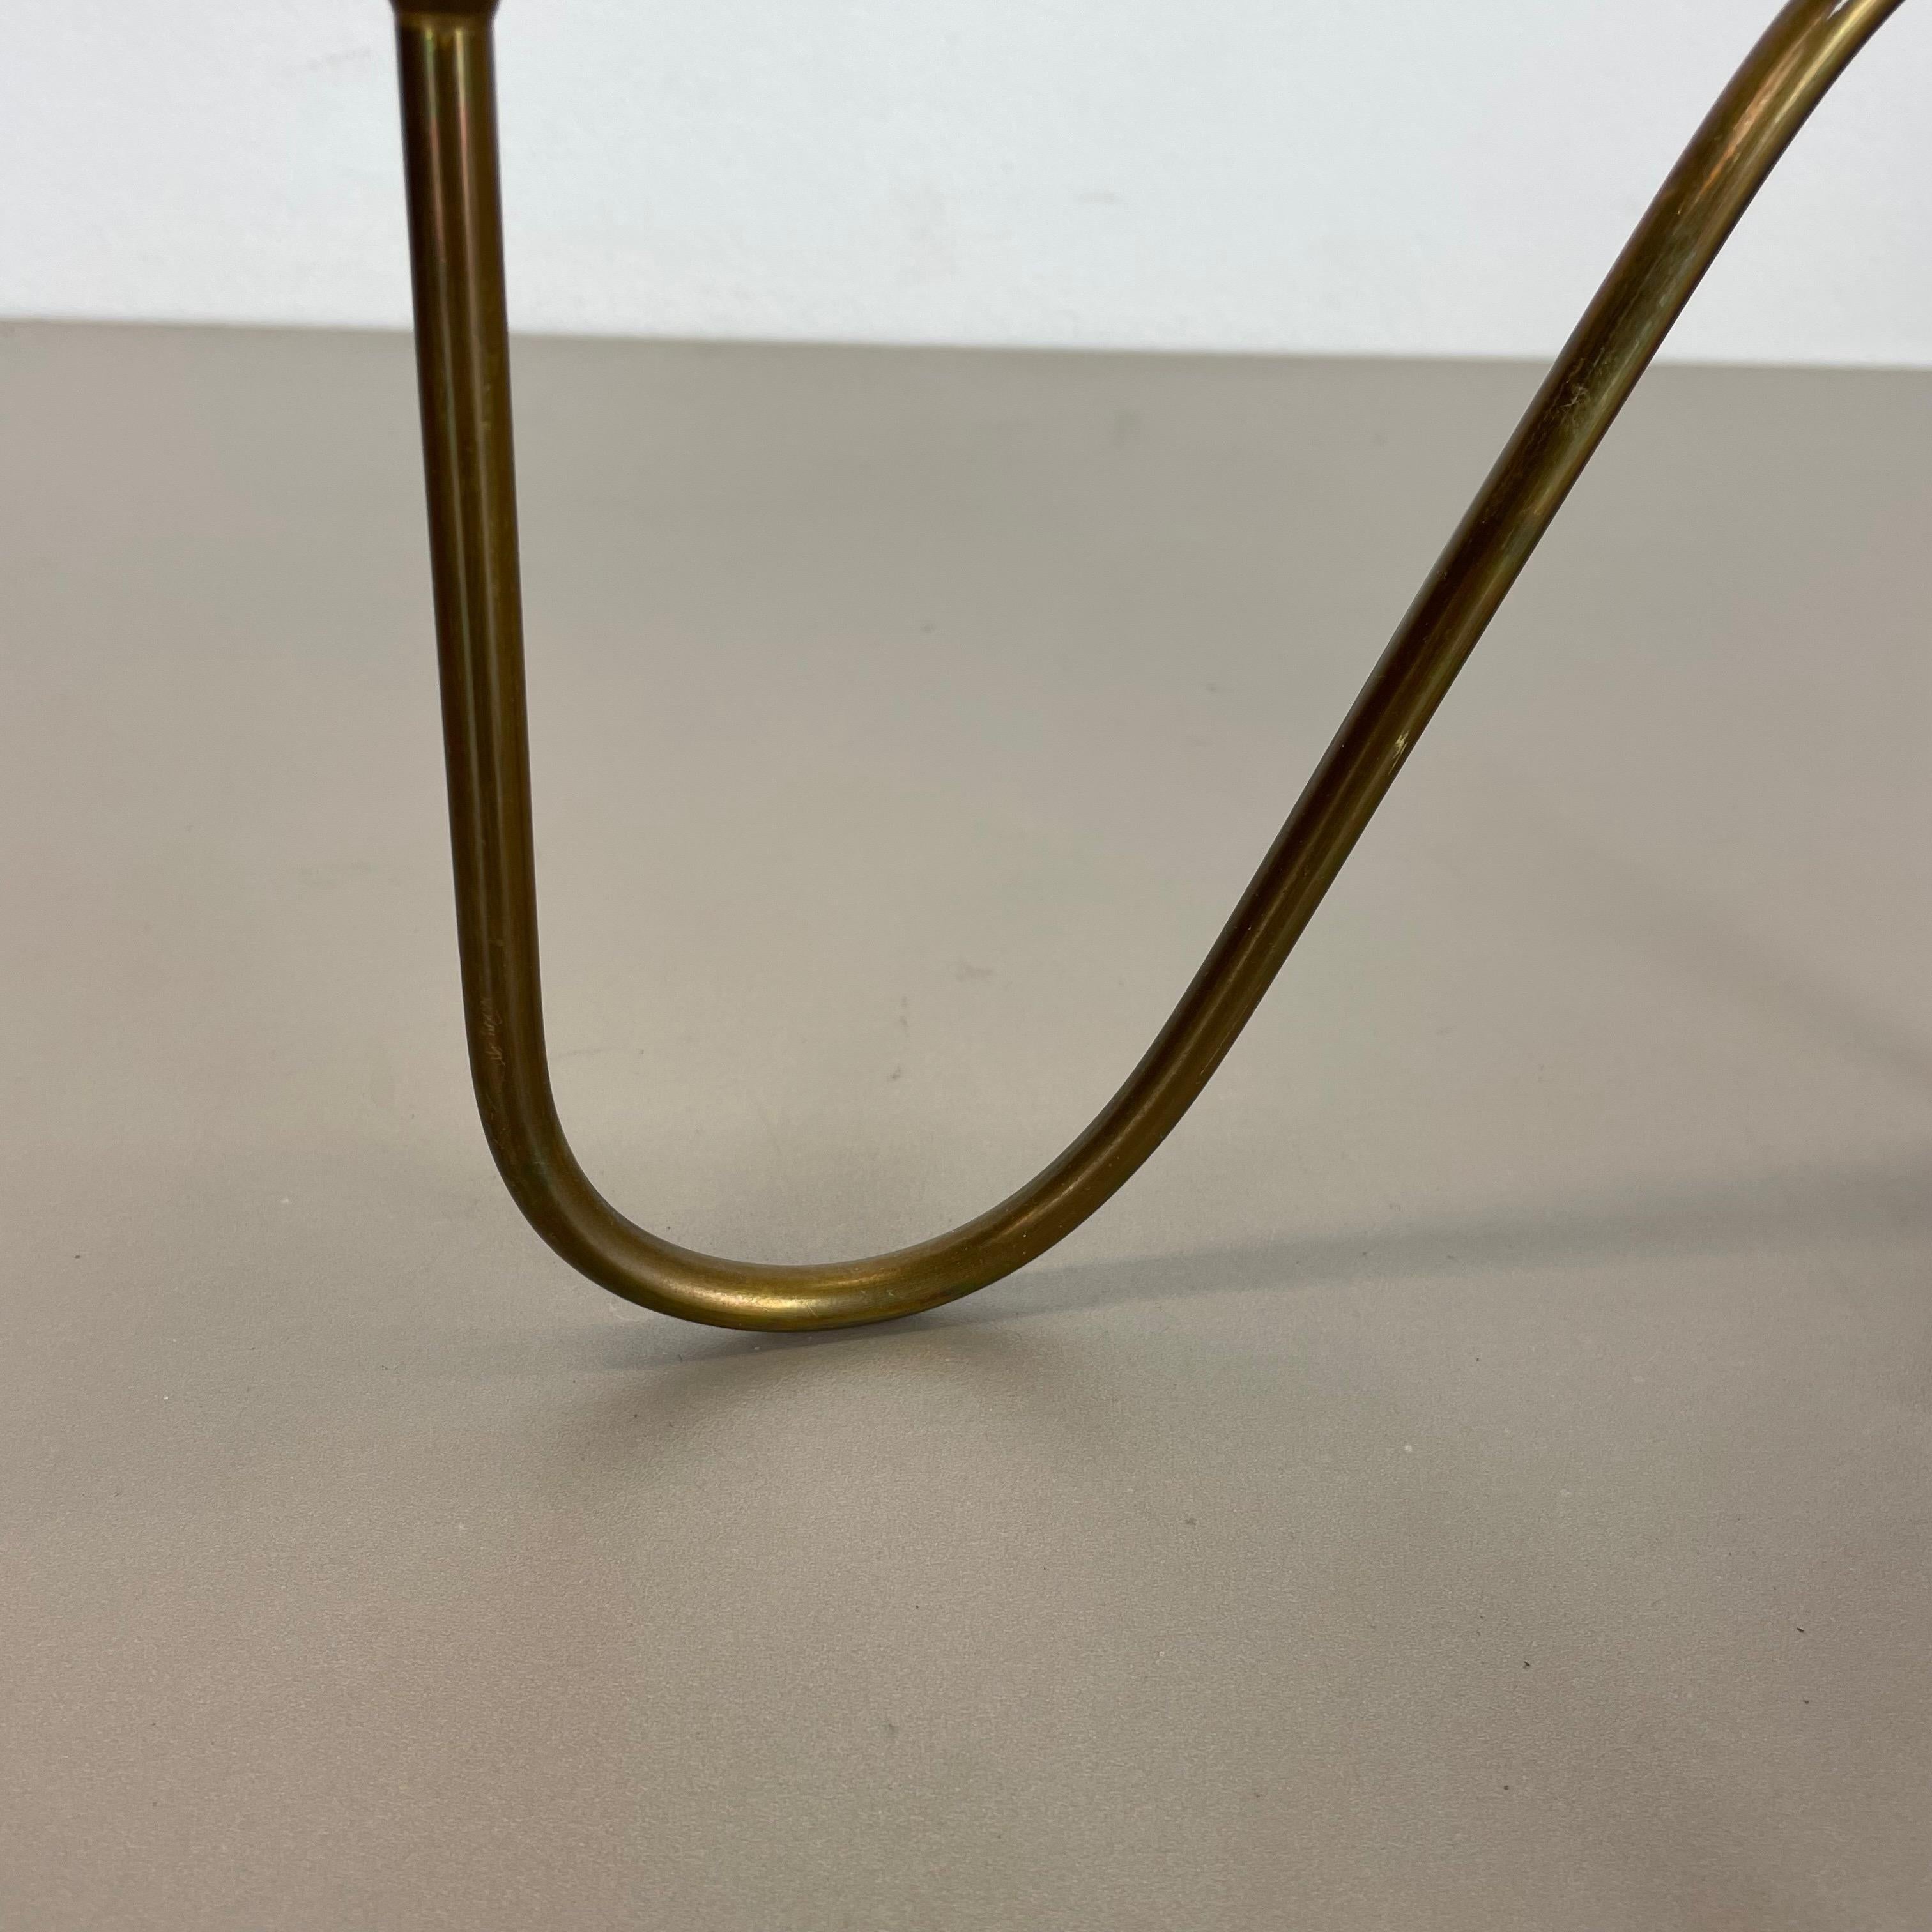 Sculptural Brass Candleholder Object by Günter Kupetz for WMF, Germany 1950s For Sale 1